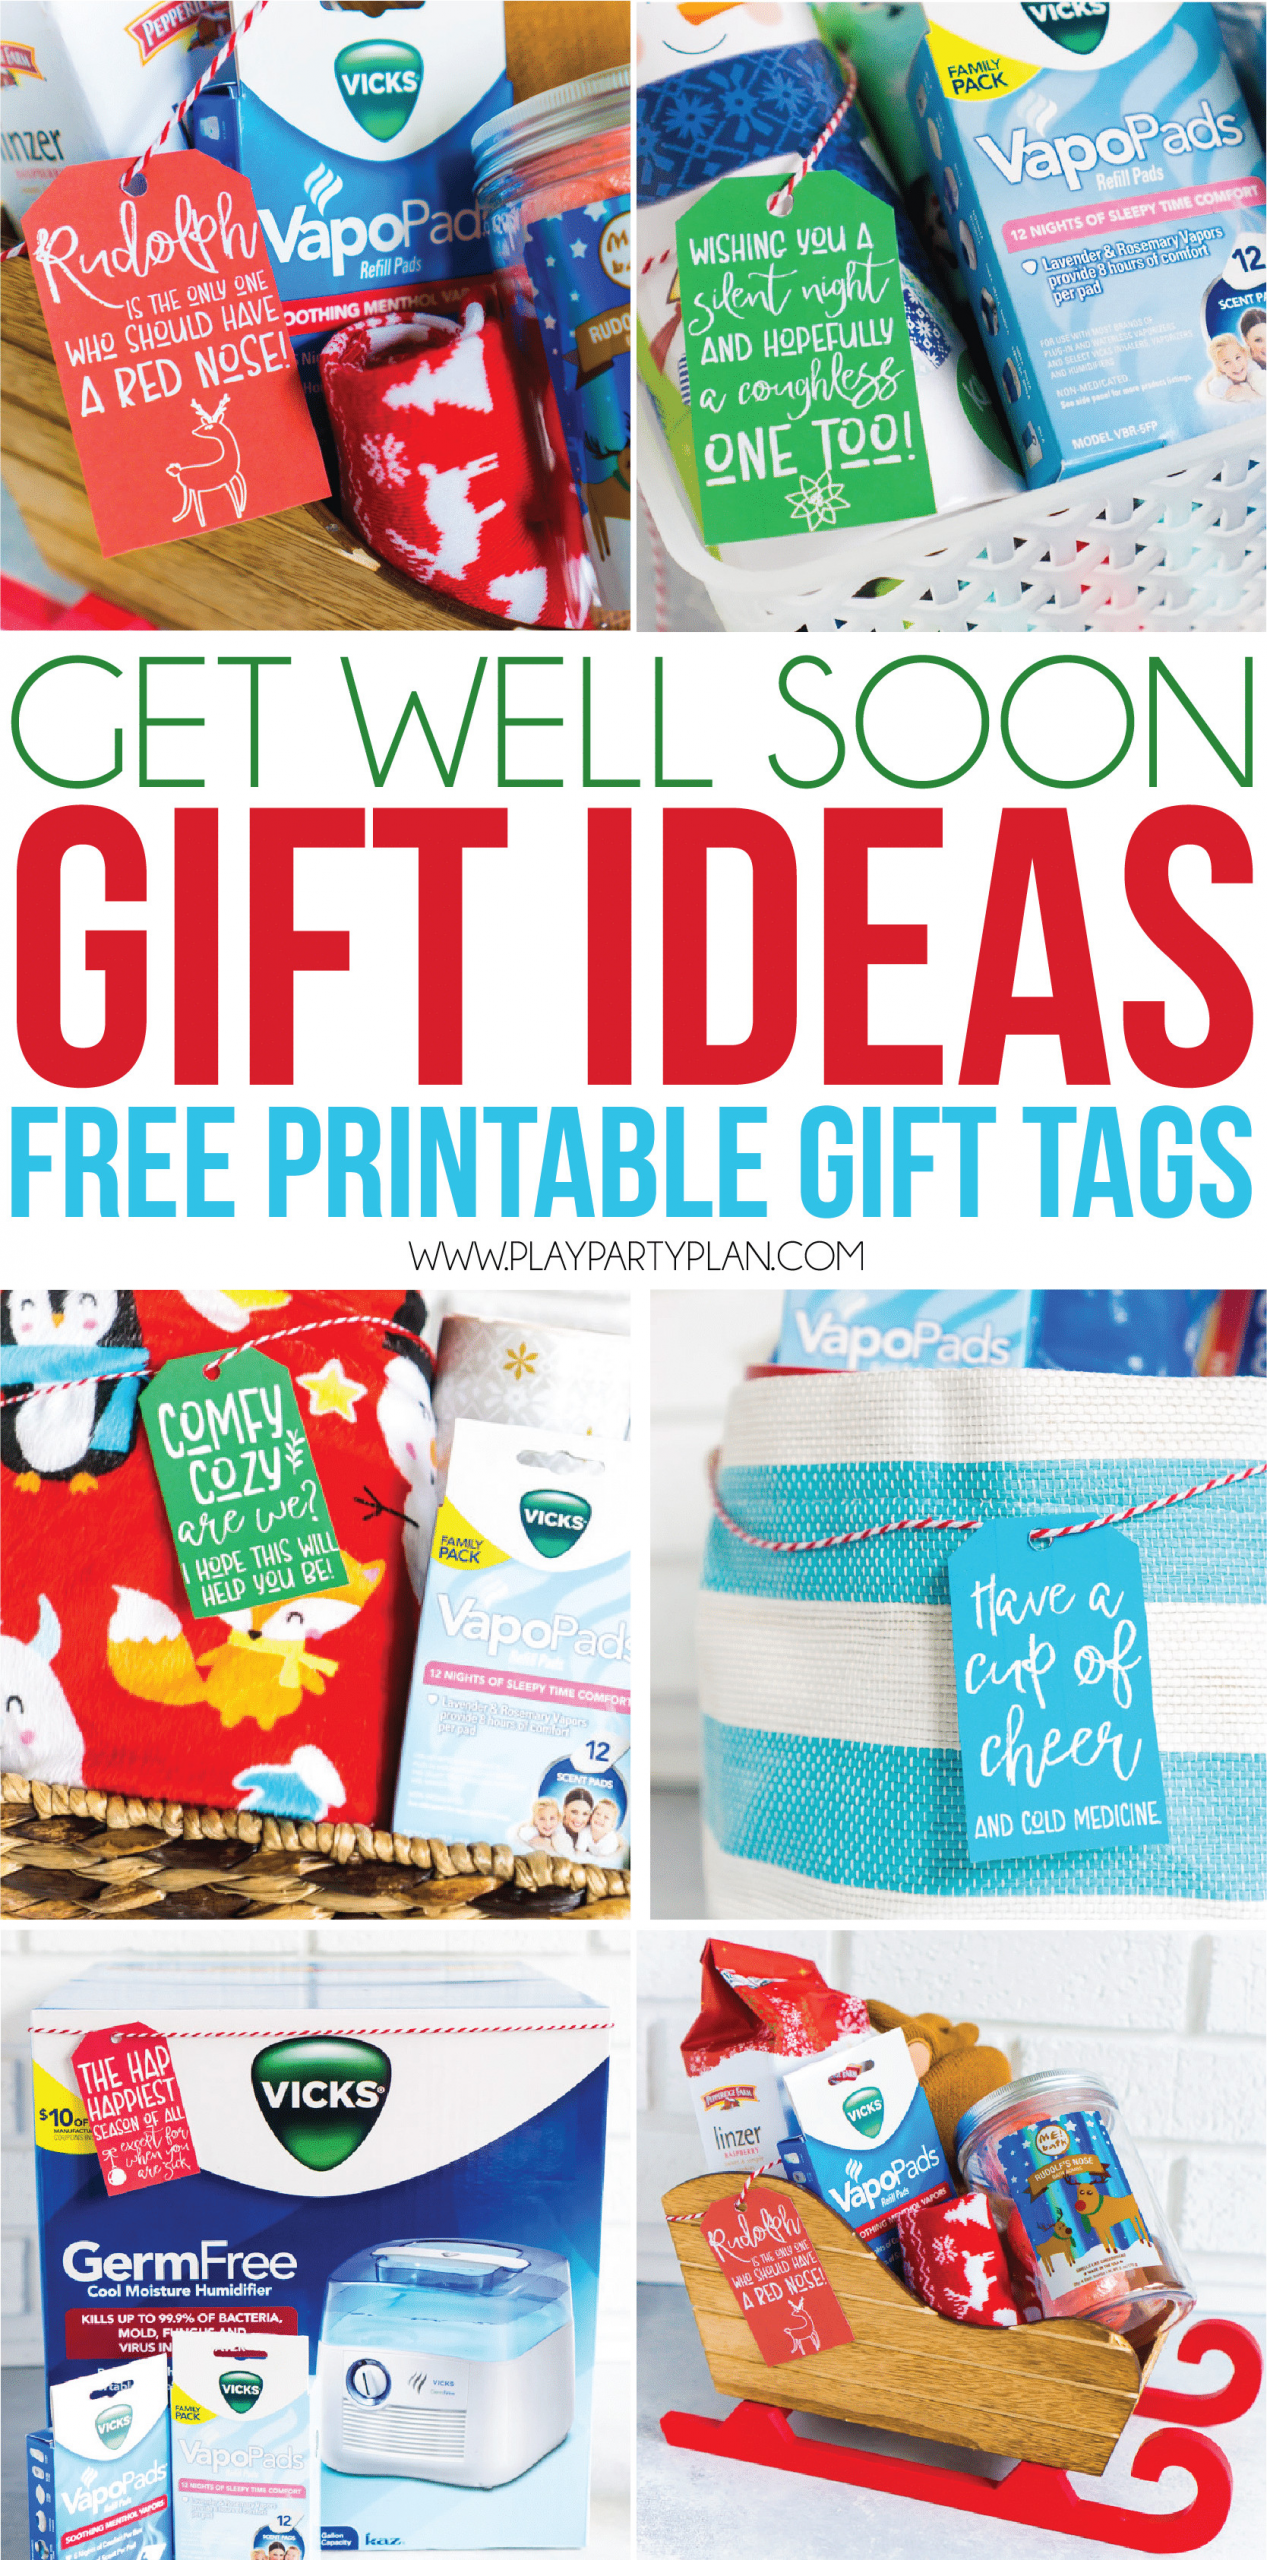 Get Well Gift Ideas For Kids
 Funny Get Well Soon Gifts & Free Printable Cards Play